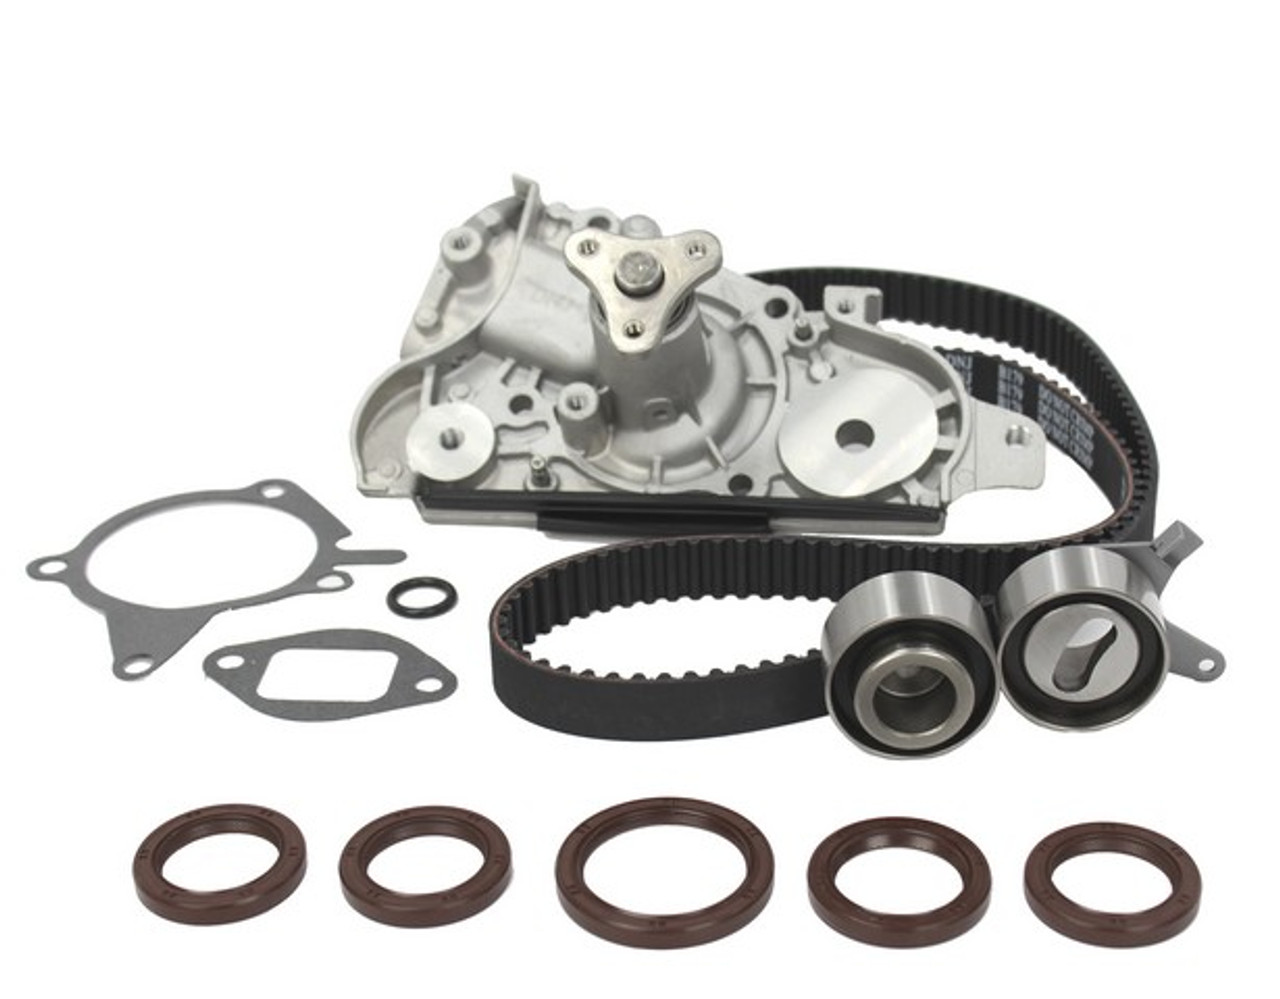 Timing Belt Kit with Water Pump 1.8L 1997 Mazda Protege - TBK490WP.23